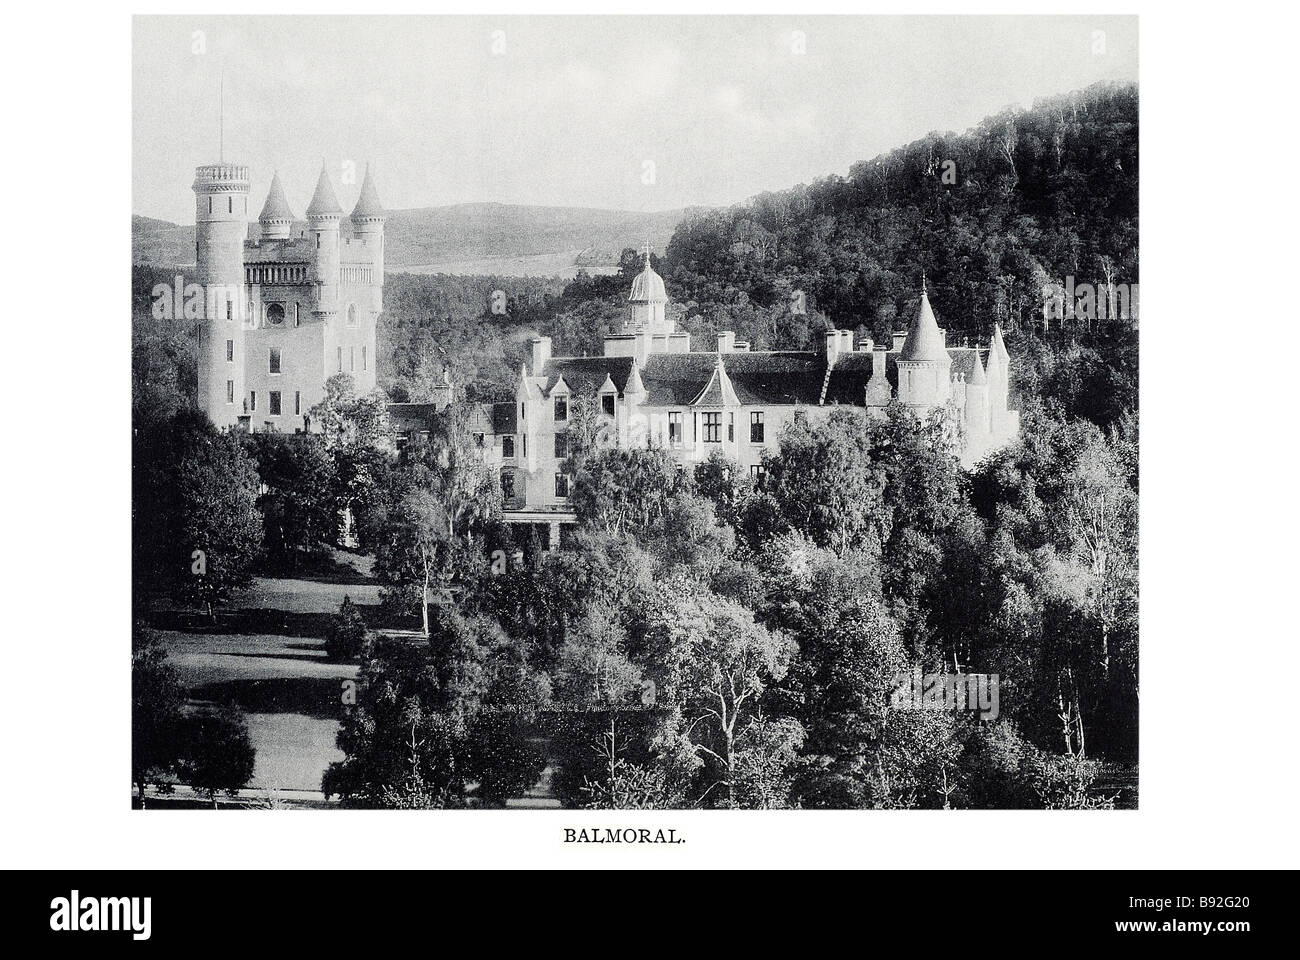 Balmoral Castle is a large estate house situated in the area of Aberdeenshire, Scotland, known as Royal Deeside. The estate was Stock Photo